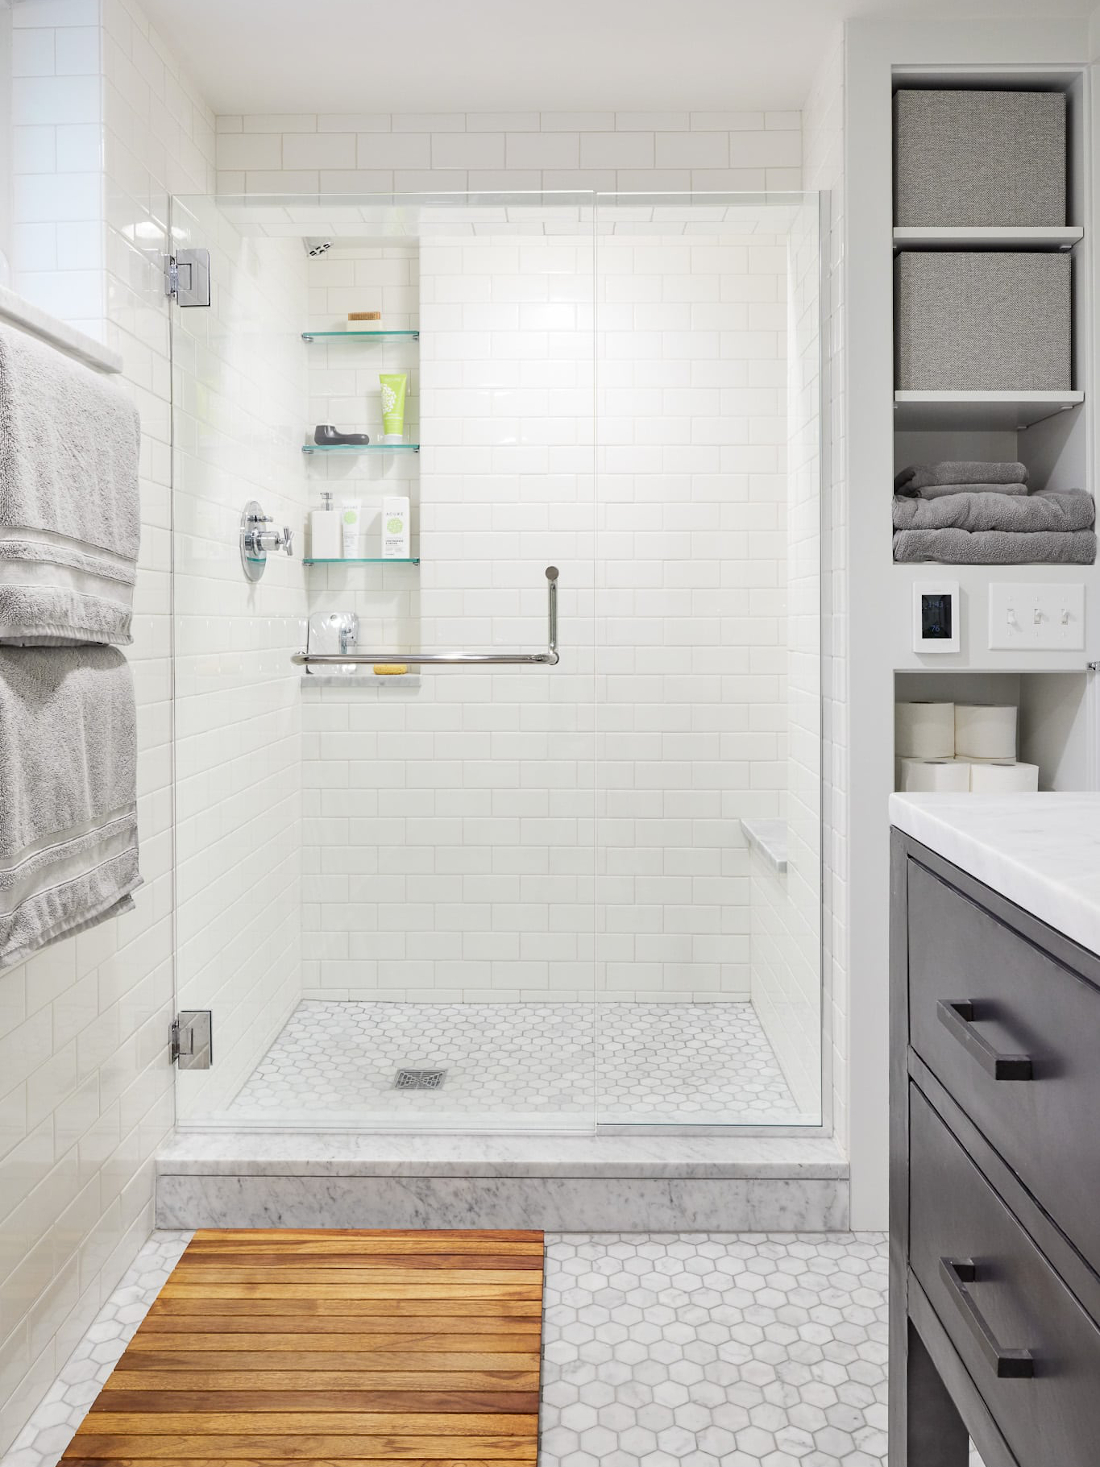 Wall-mounted programmable thermostat for heated floors in a Mt. Baker bathroom remodel (Photo: Cindy Apple Photography for Model Remodel)